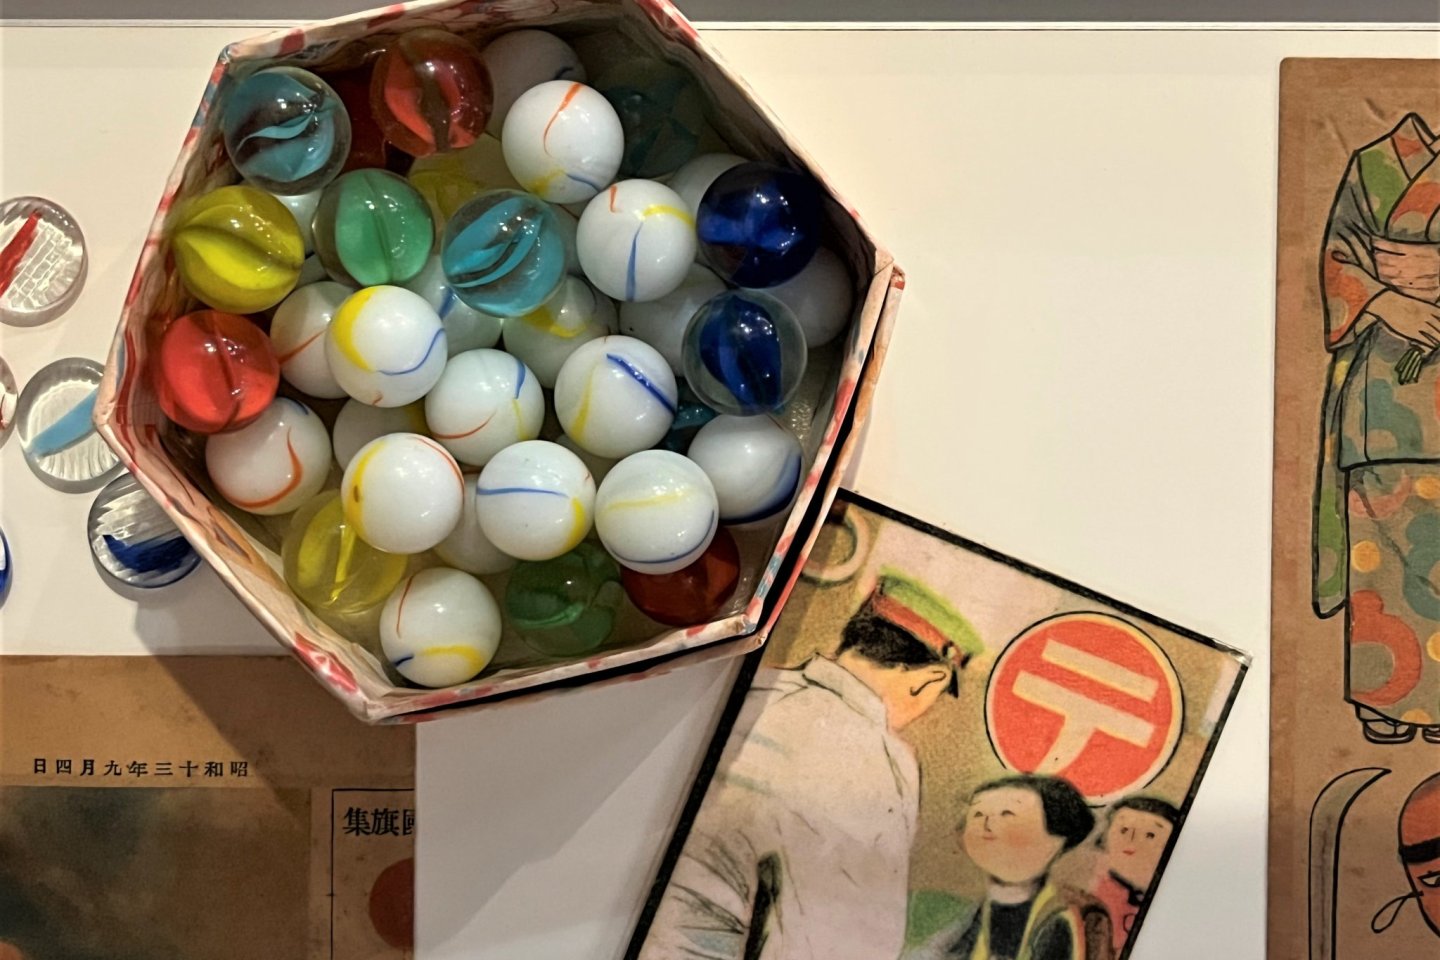 Abandoned Marbles are a reminder of a lost youth